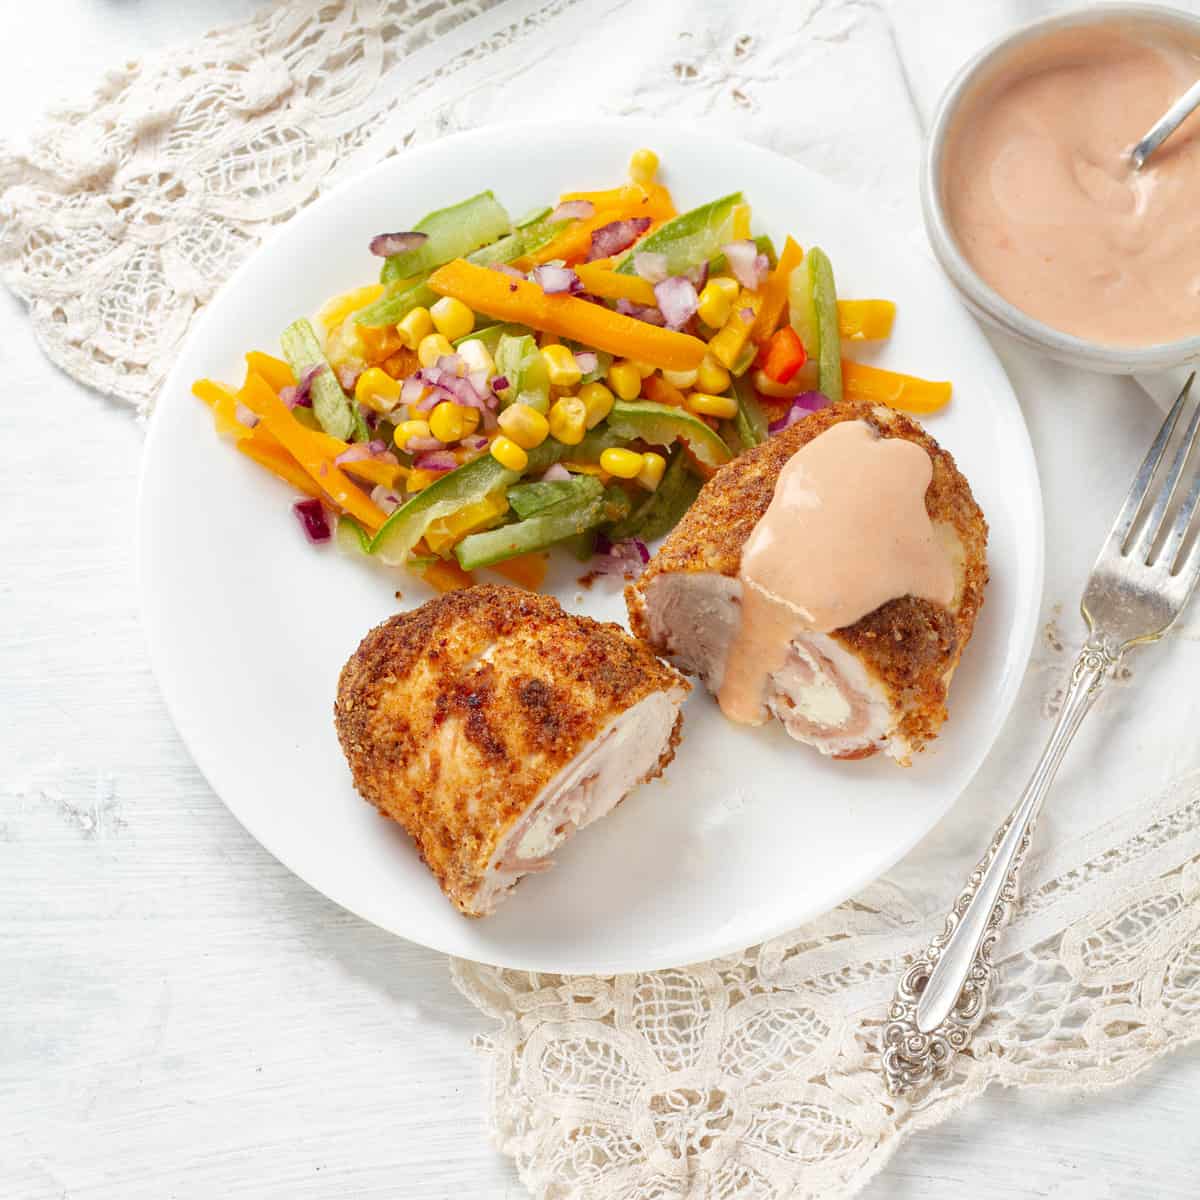 Chicken Cordon Bleu served with sauce and salads